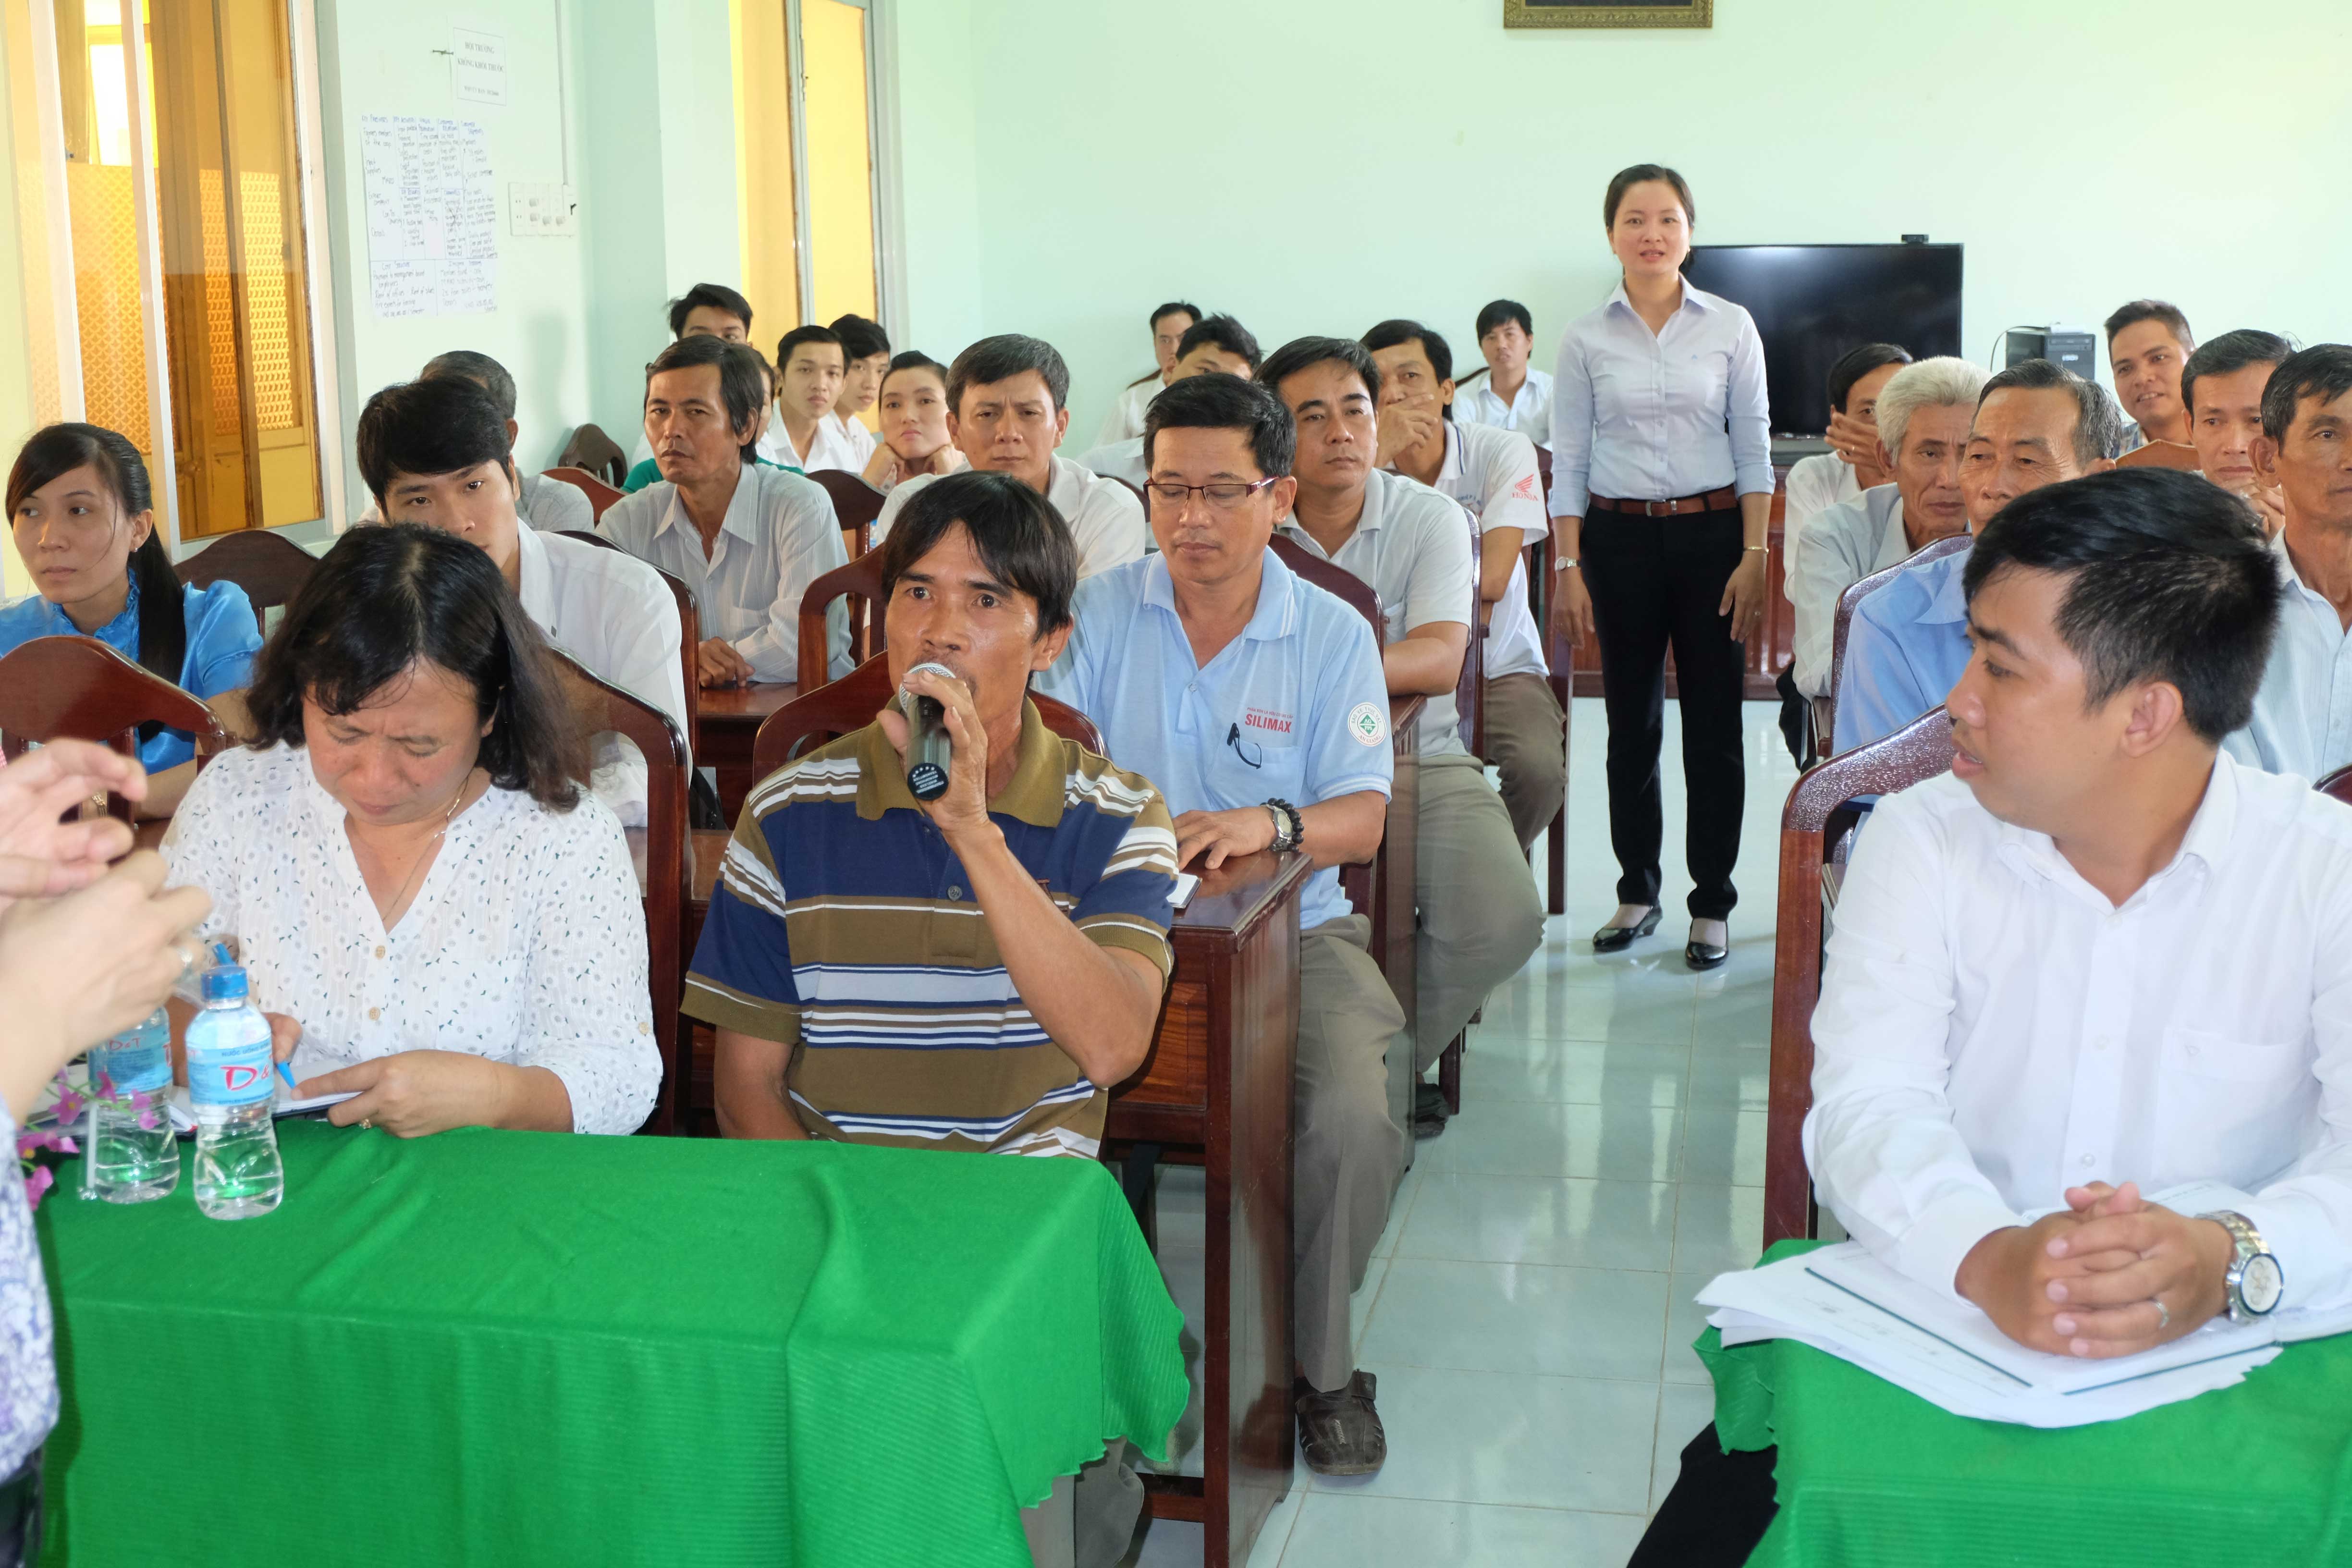 Mongo farmers, collectors, processors, cooperative members and government representatives together learn to analyse the value chain of mango in Vietnam.